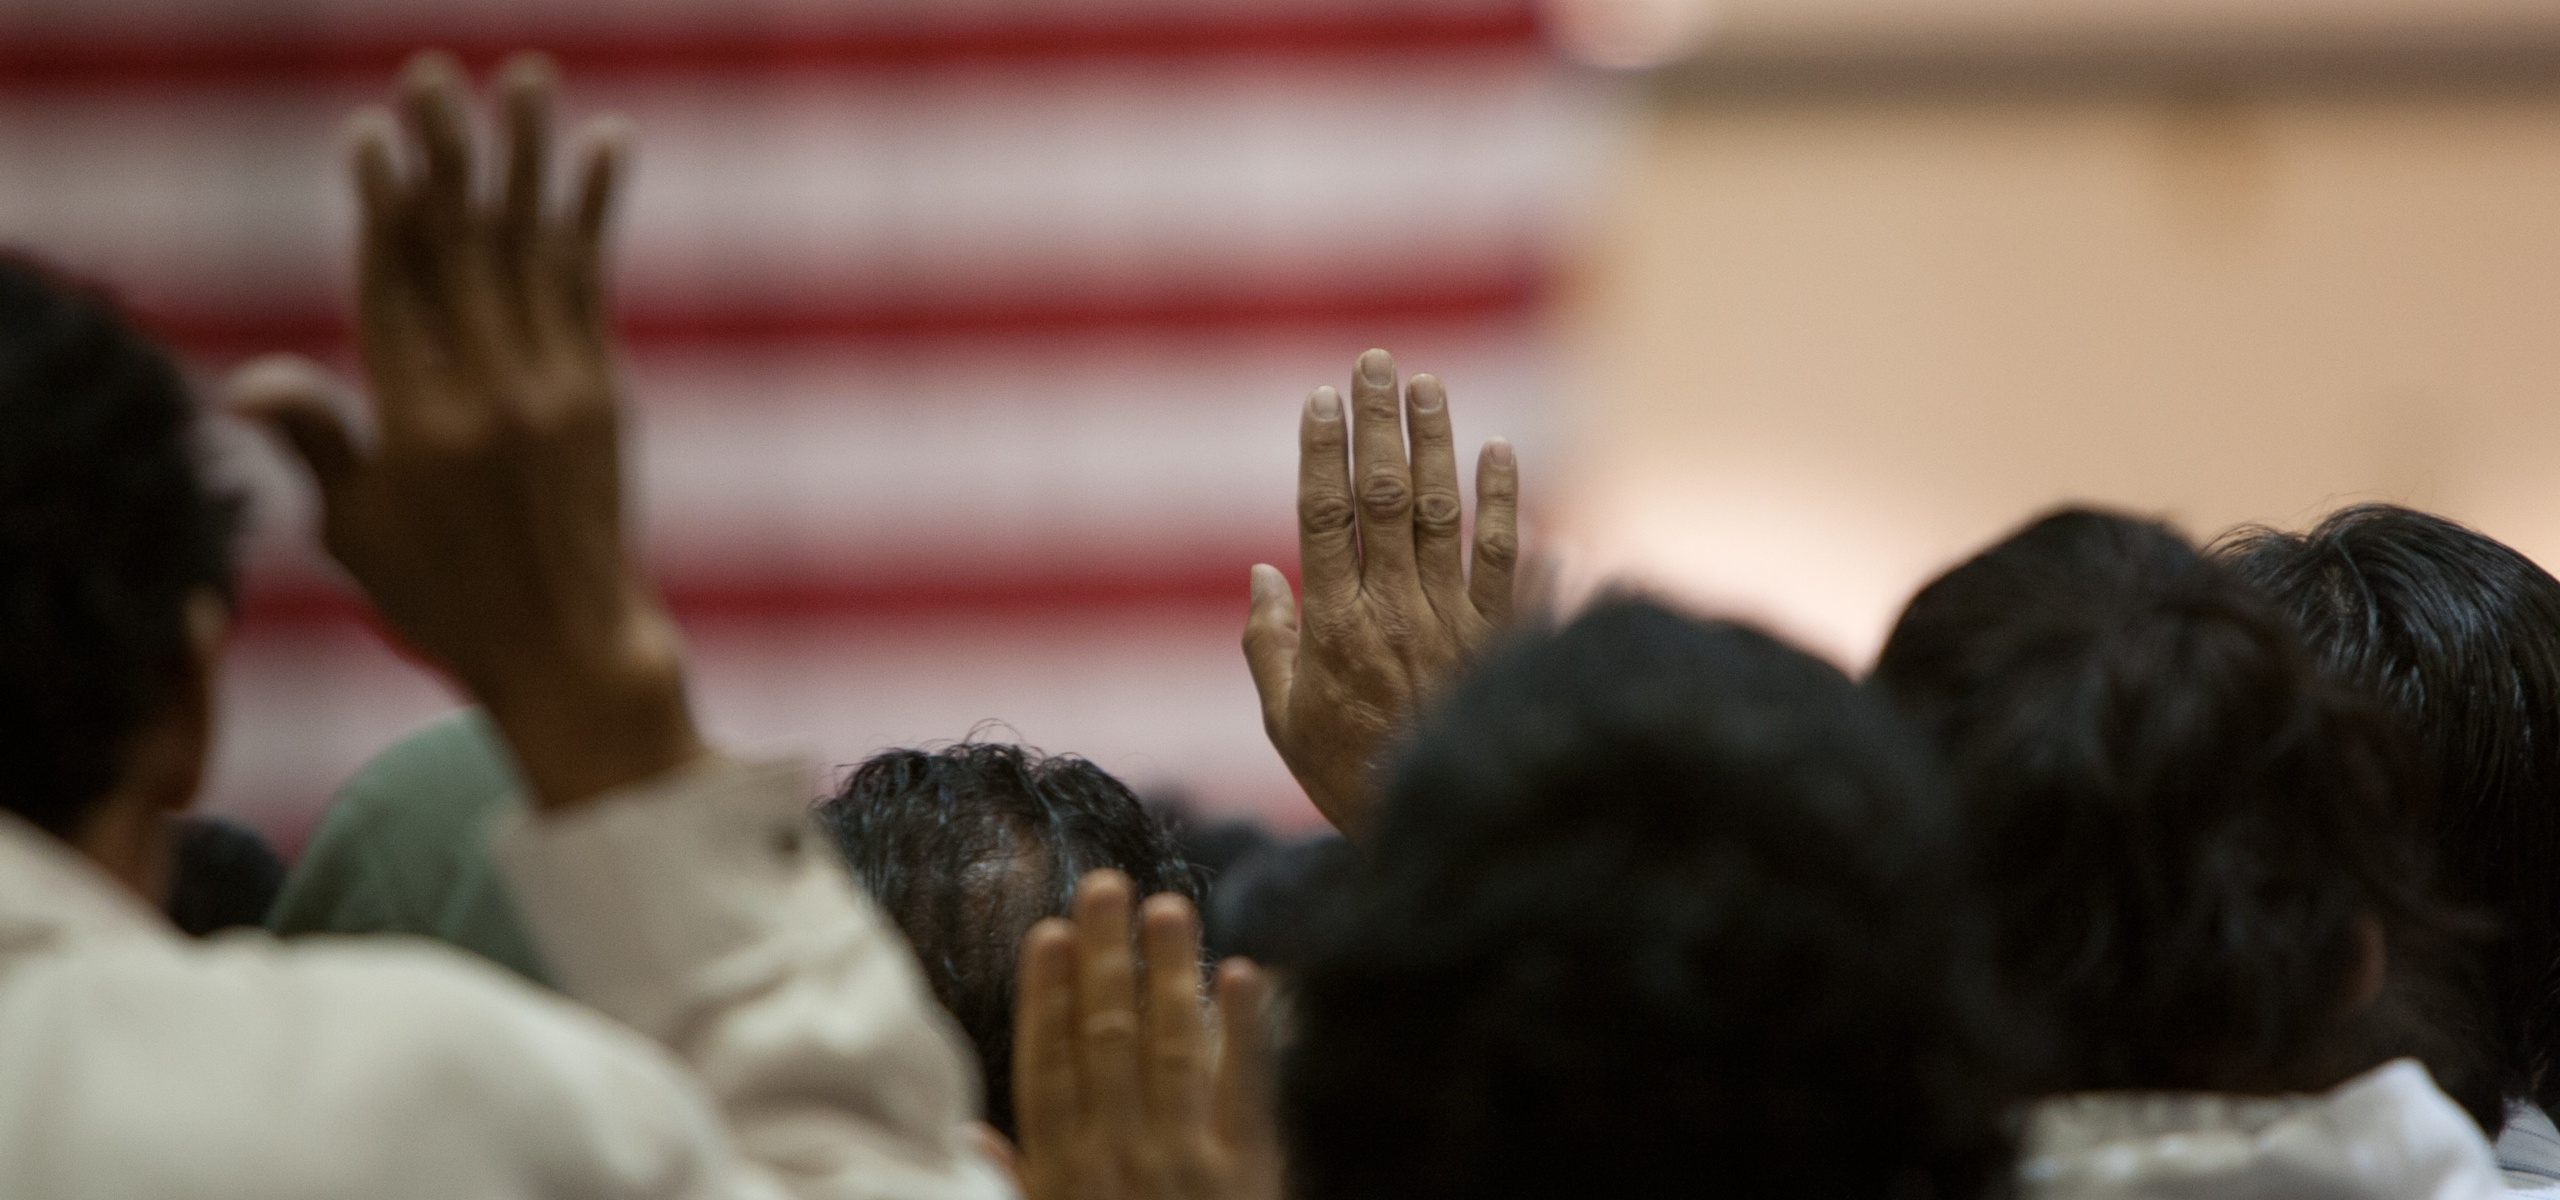 Republican Resistance to Easy Naturalization Will Likely Backfire